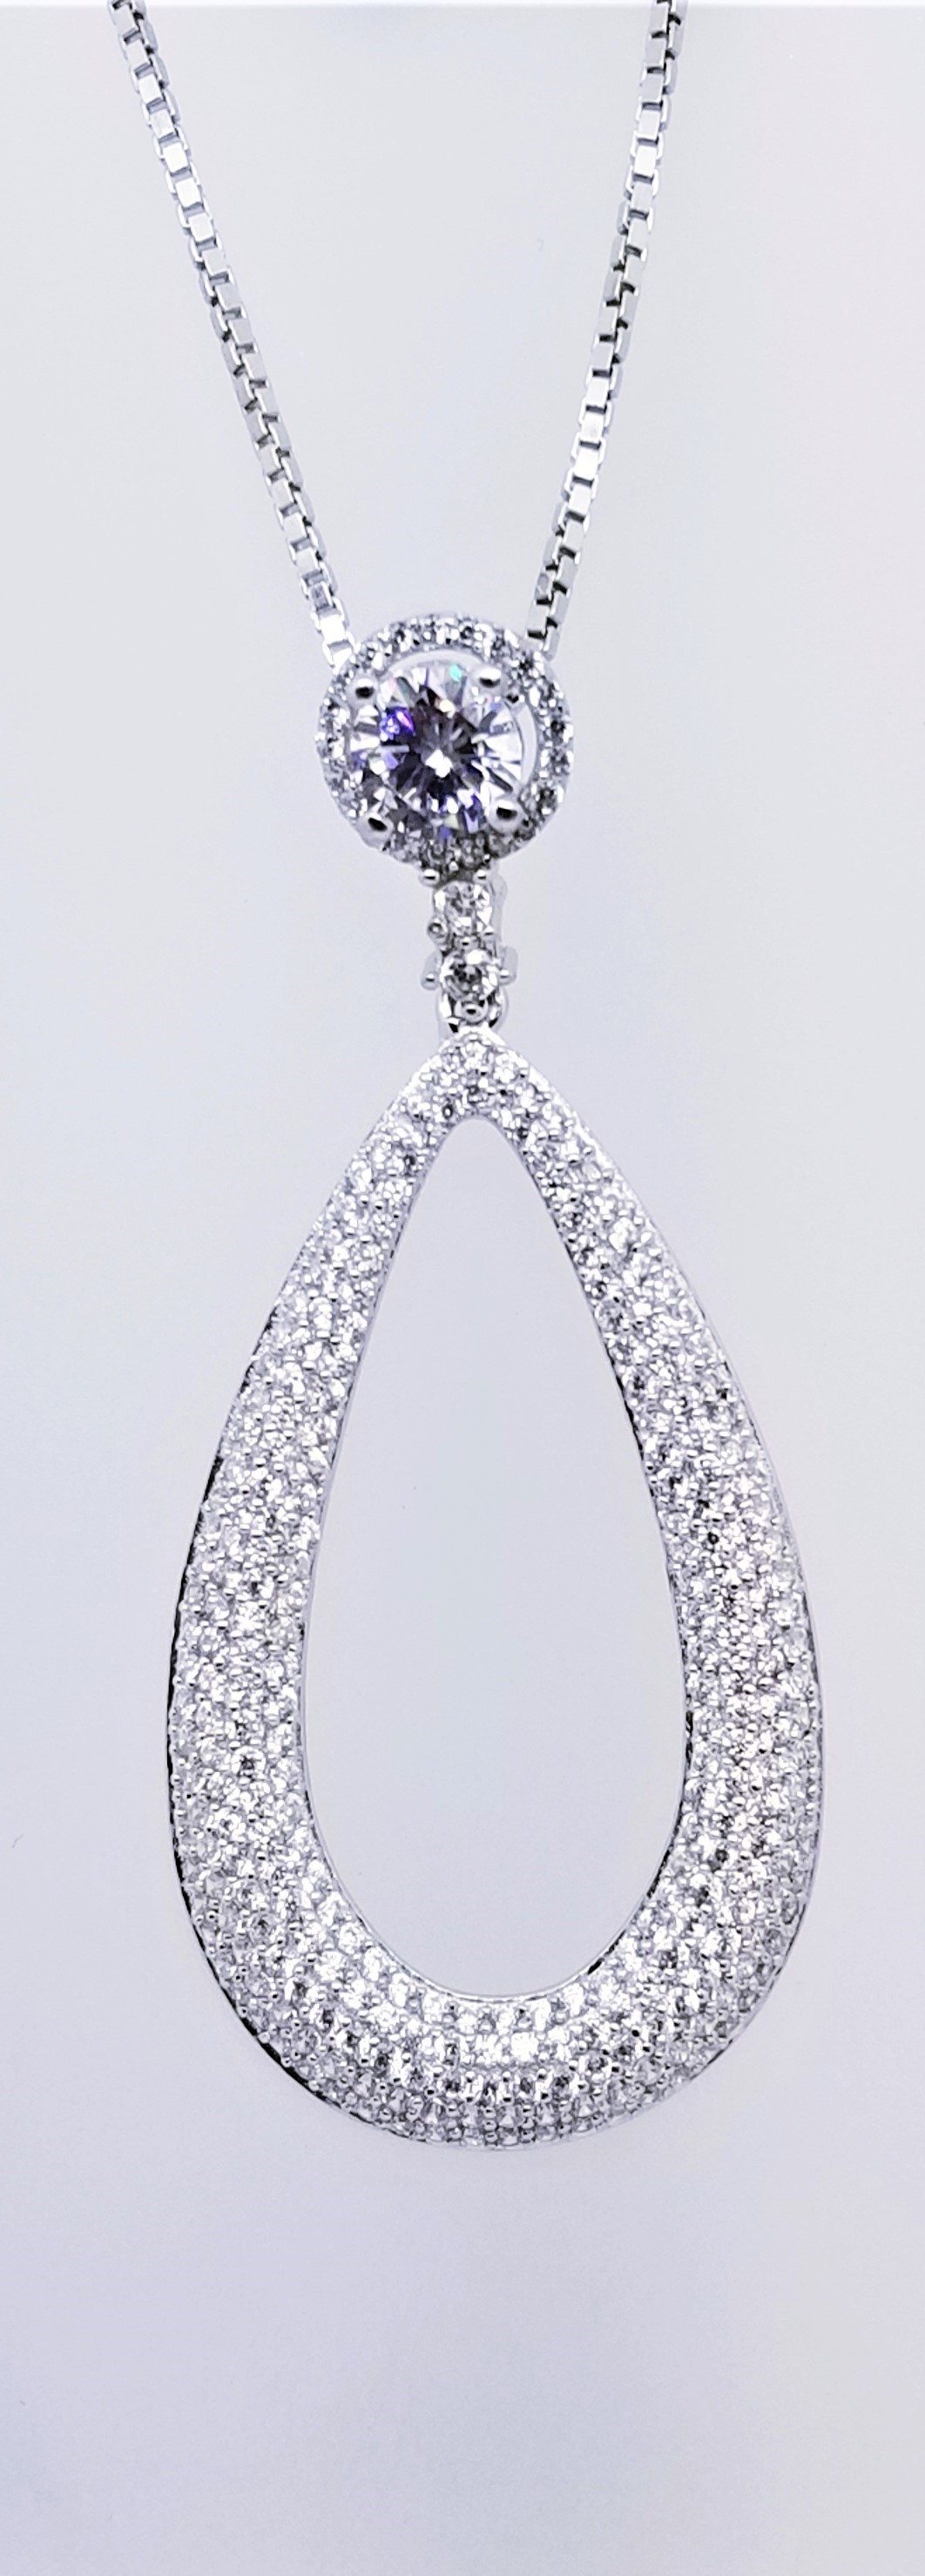 925 Sterling Silver Rhodium Tone Pendant With CZ Stones 